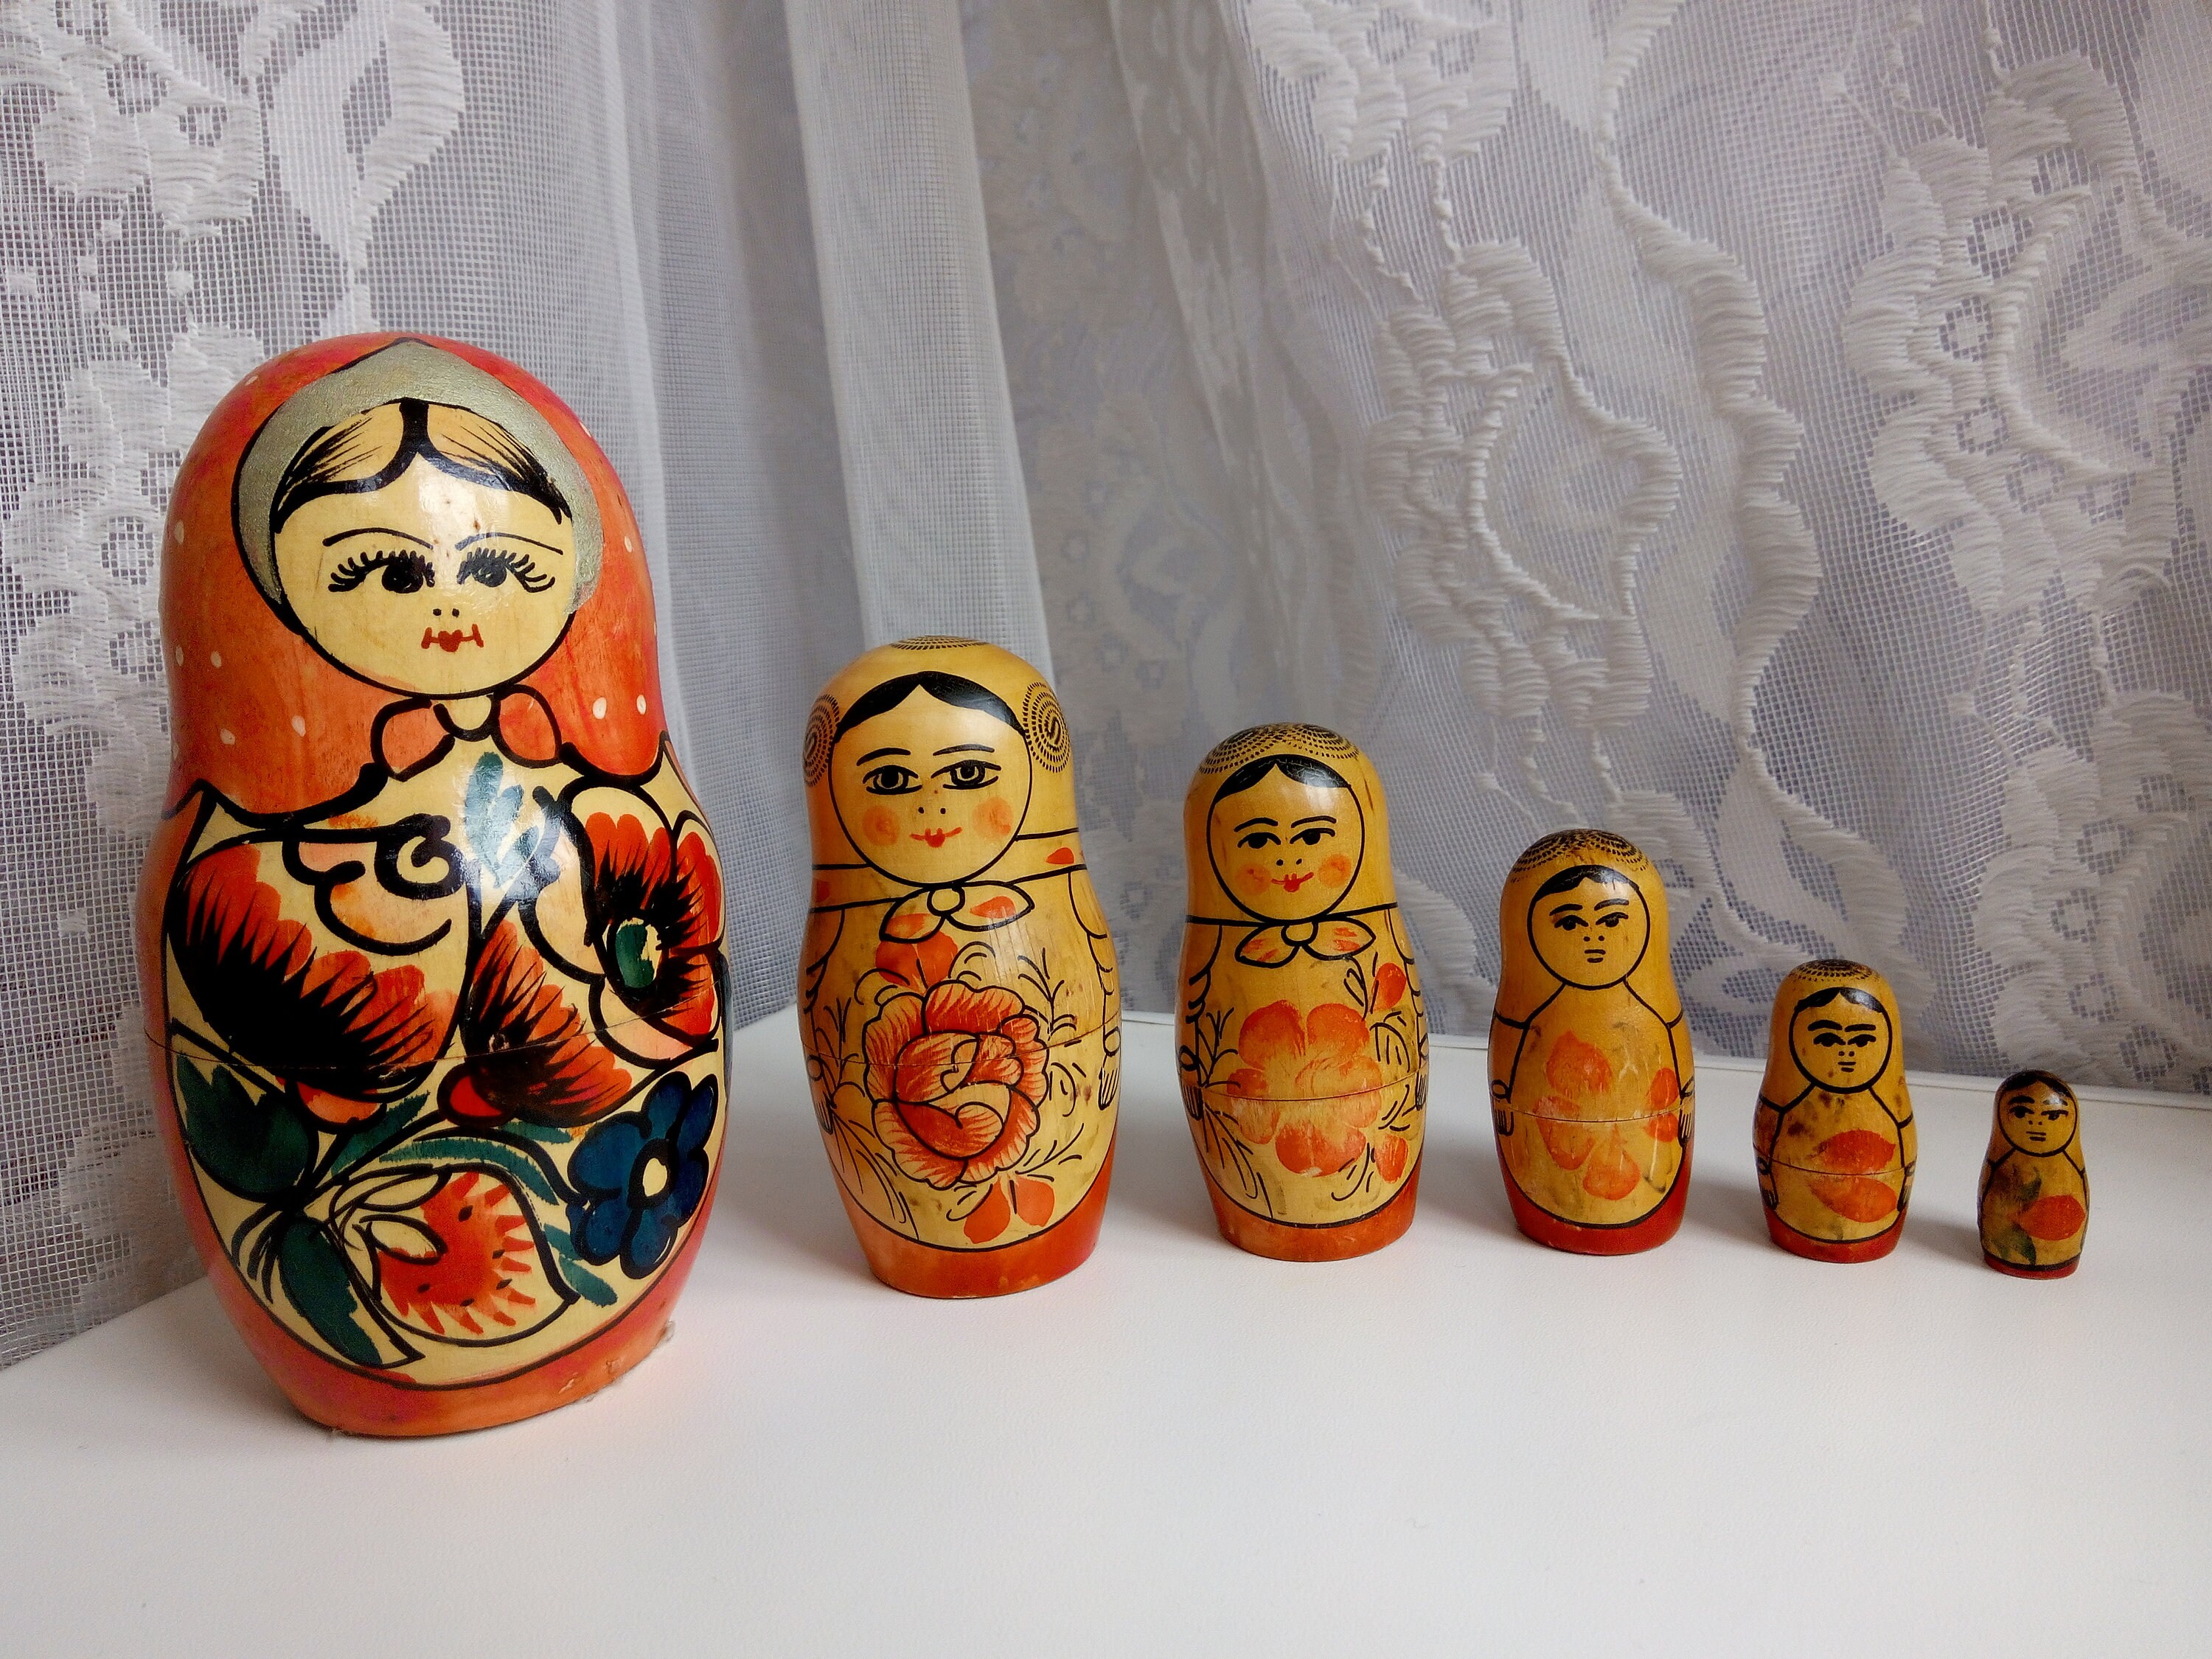 70s Ussr Wooden Doll - Etsy